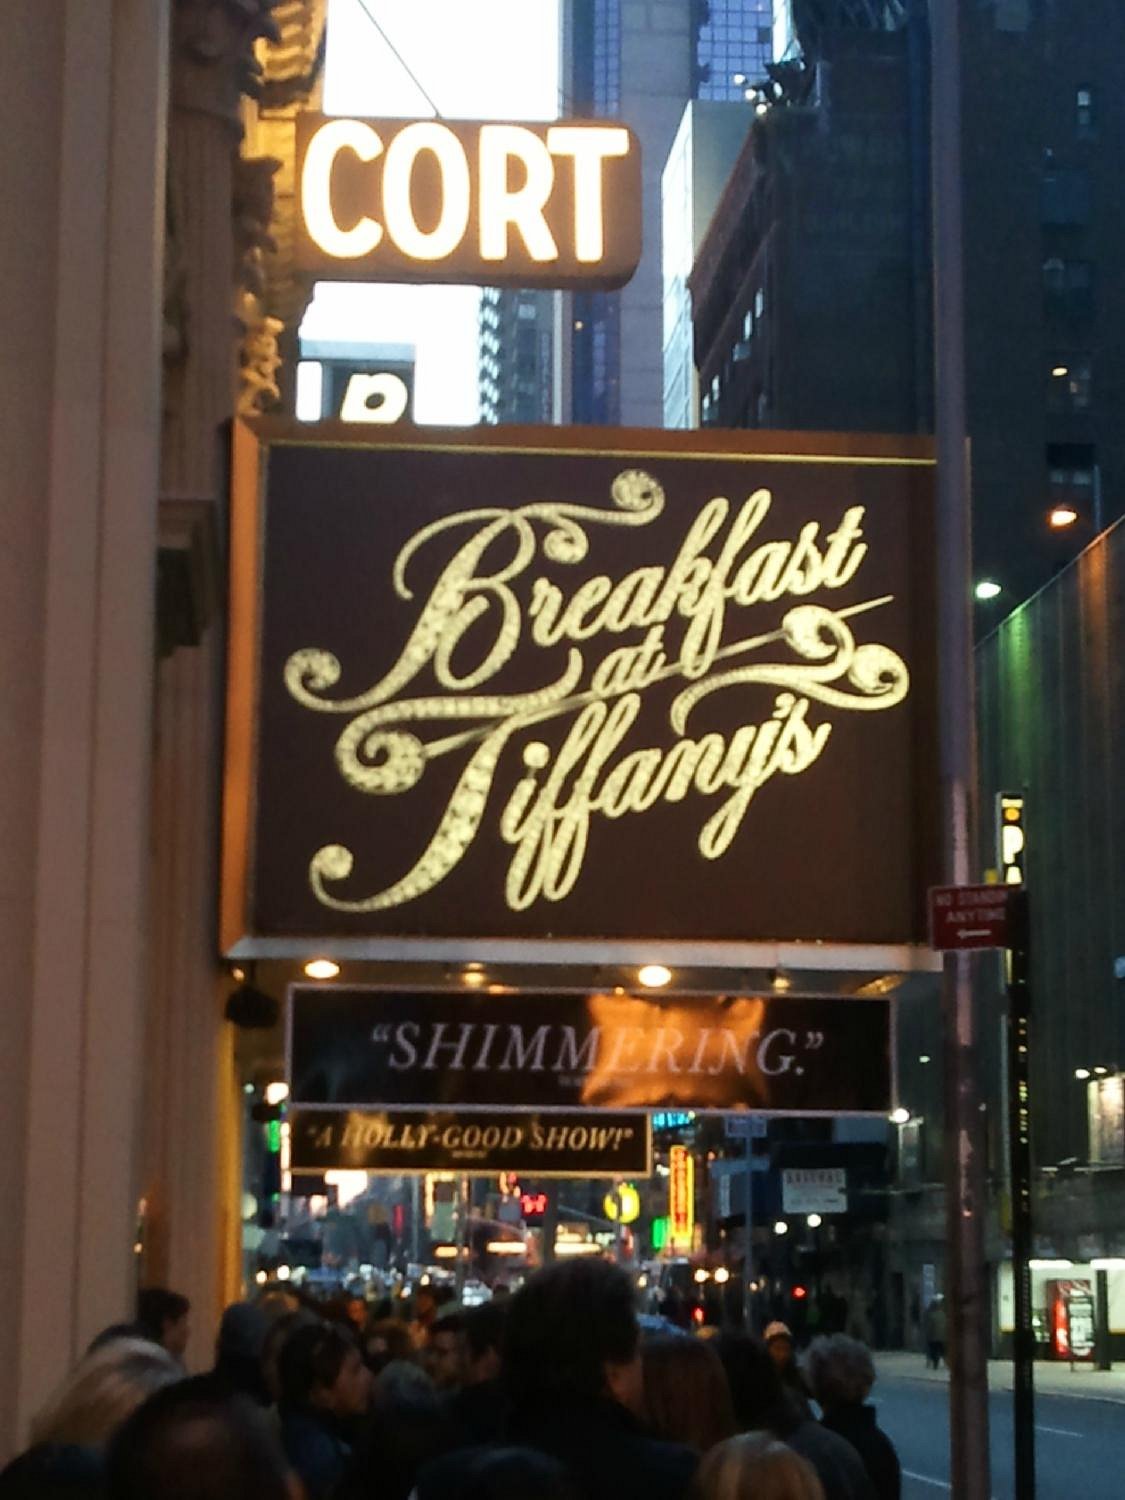 How to get a Reservation for Breakfast at Tiffany's